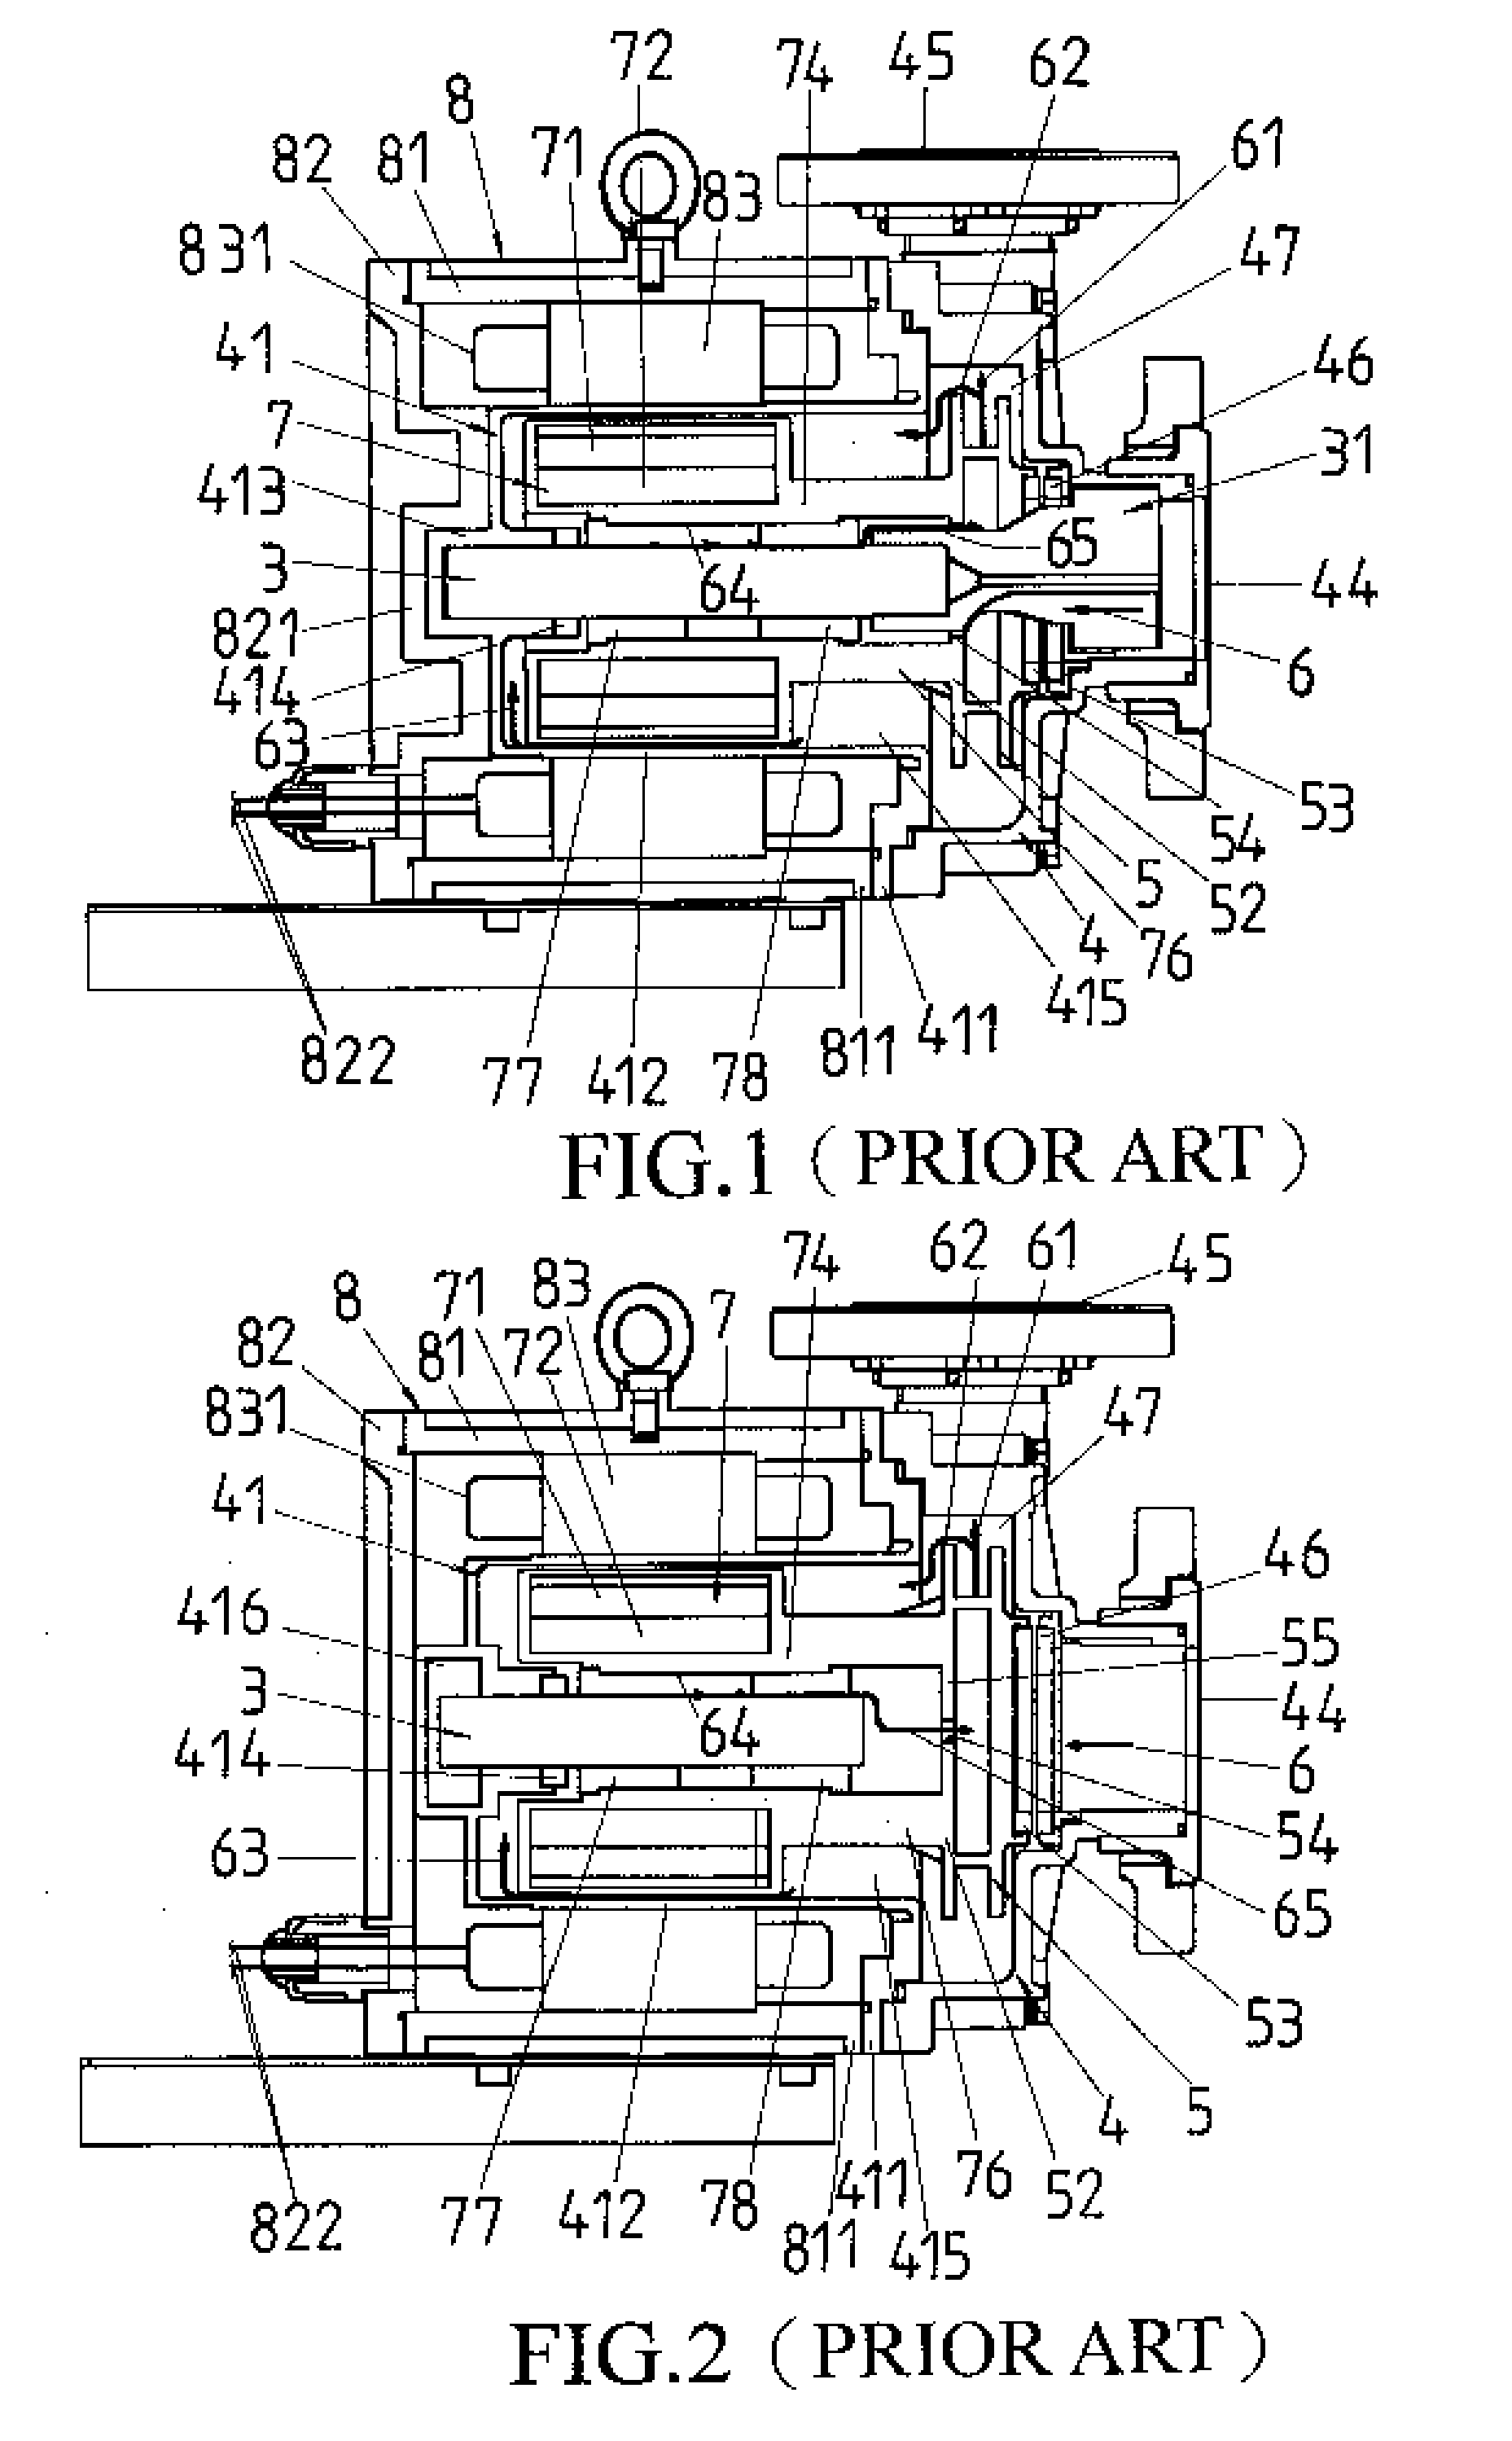 Structural improvement of a canned motor pump